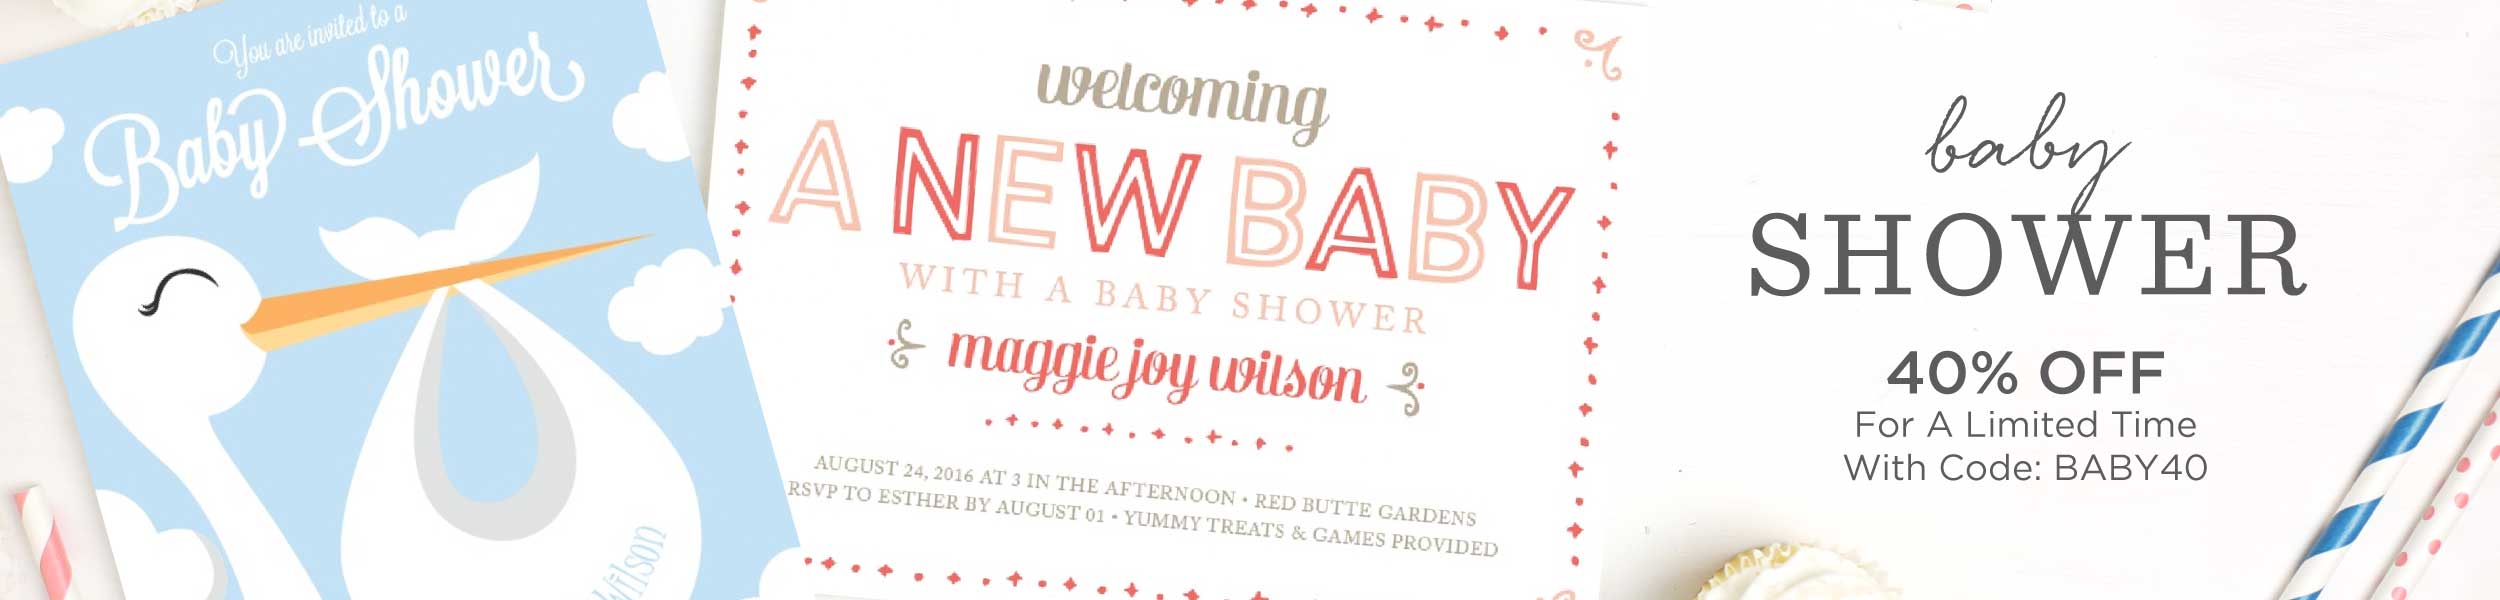 Full Size of Baby Shower:baby Shower Decorations For Boys Elegant Baby Shower Pinterest Baby Shower Ideas For Girls Creative Baby Shower Ideas Baby Shower Card Message Ideas Zazzle Invitations Baby Girl Themes For Baby Shower Oriental Trading Baby Shower